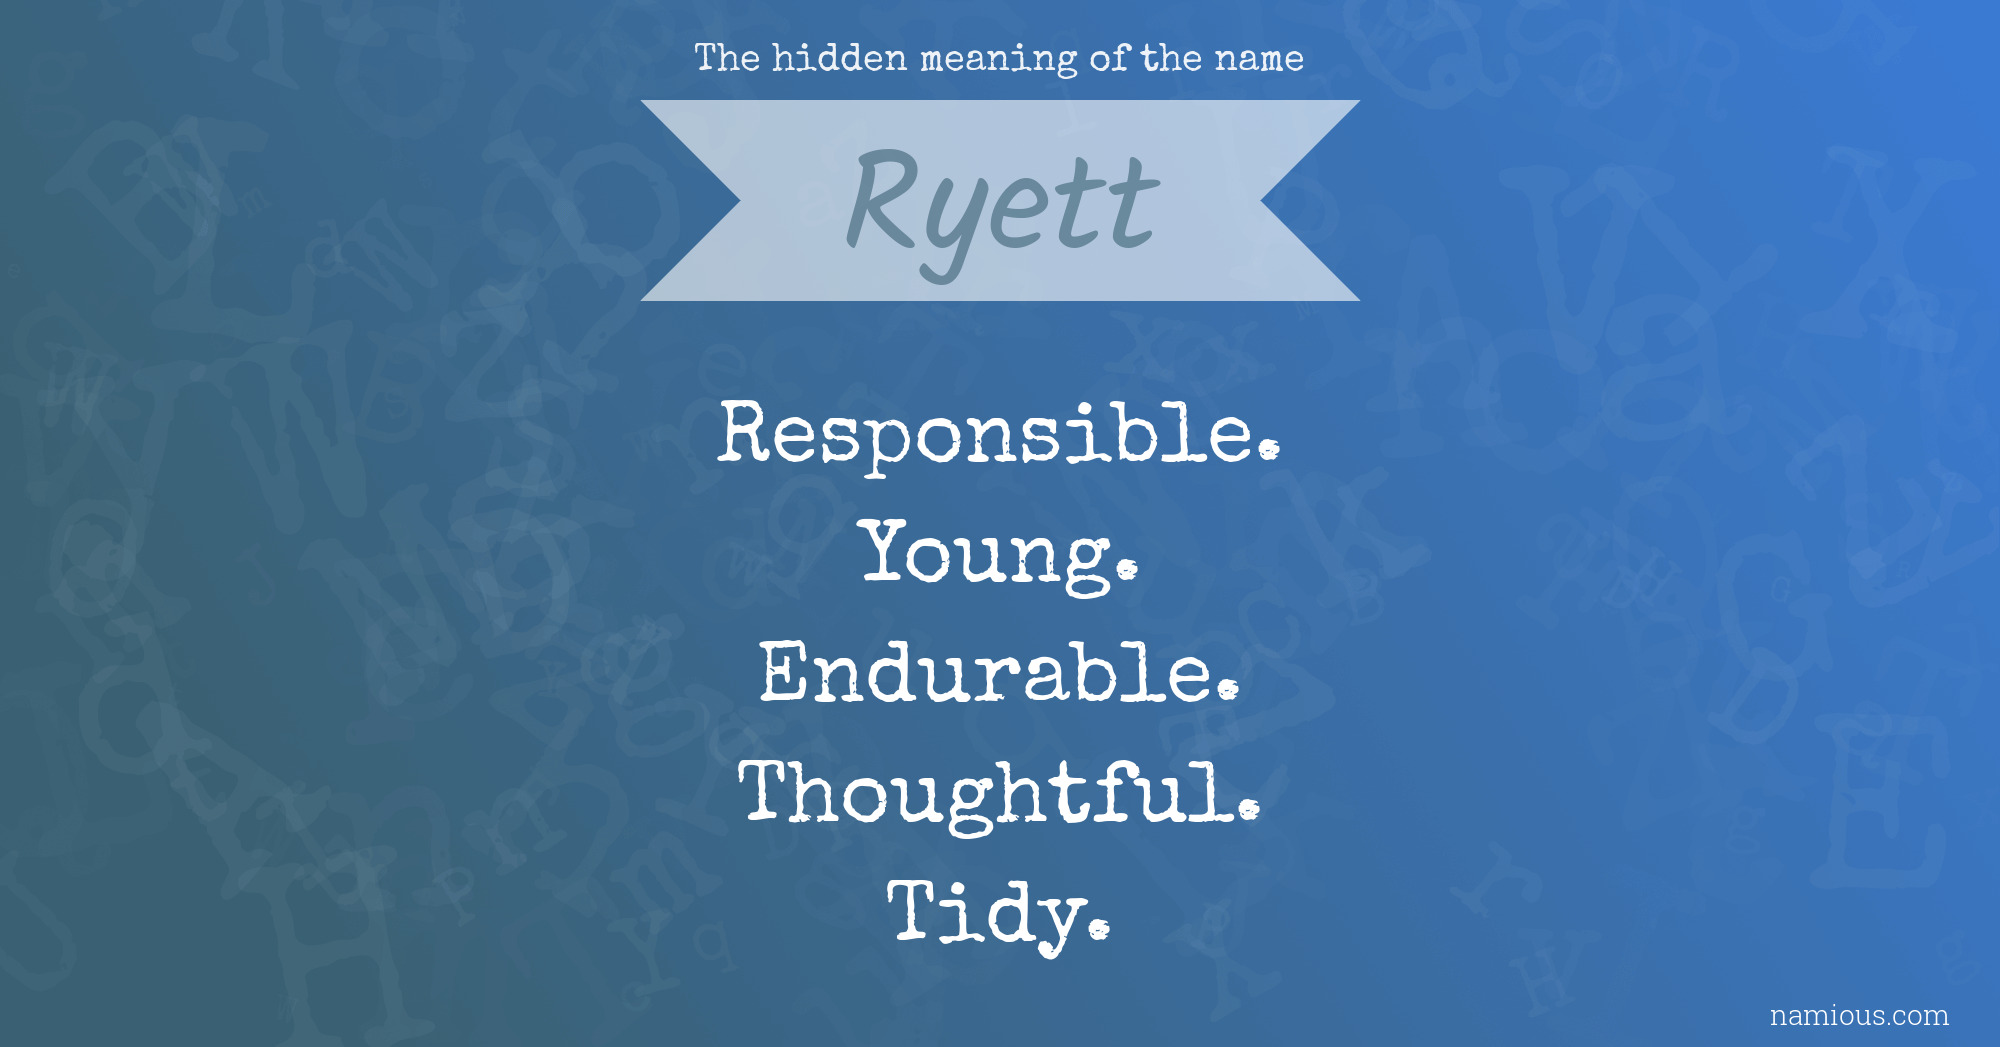 The hidden meaning of the name Ryett